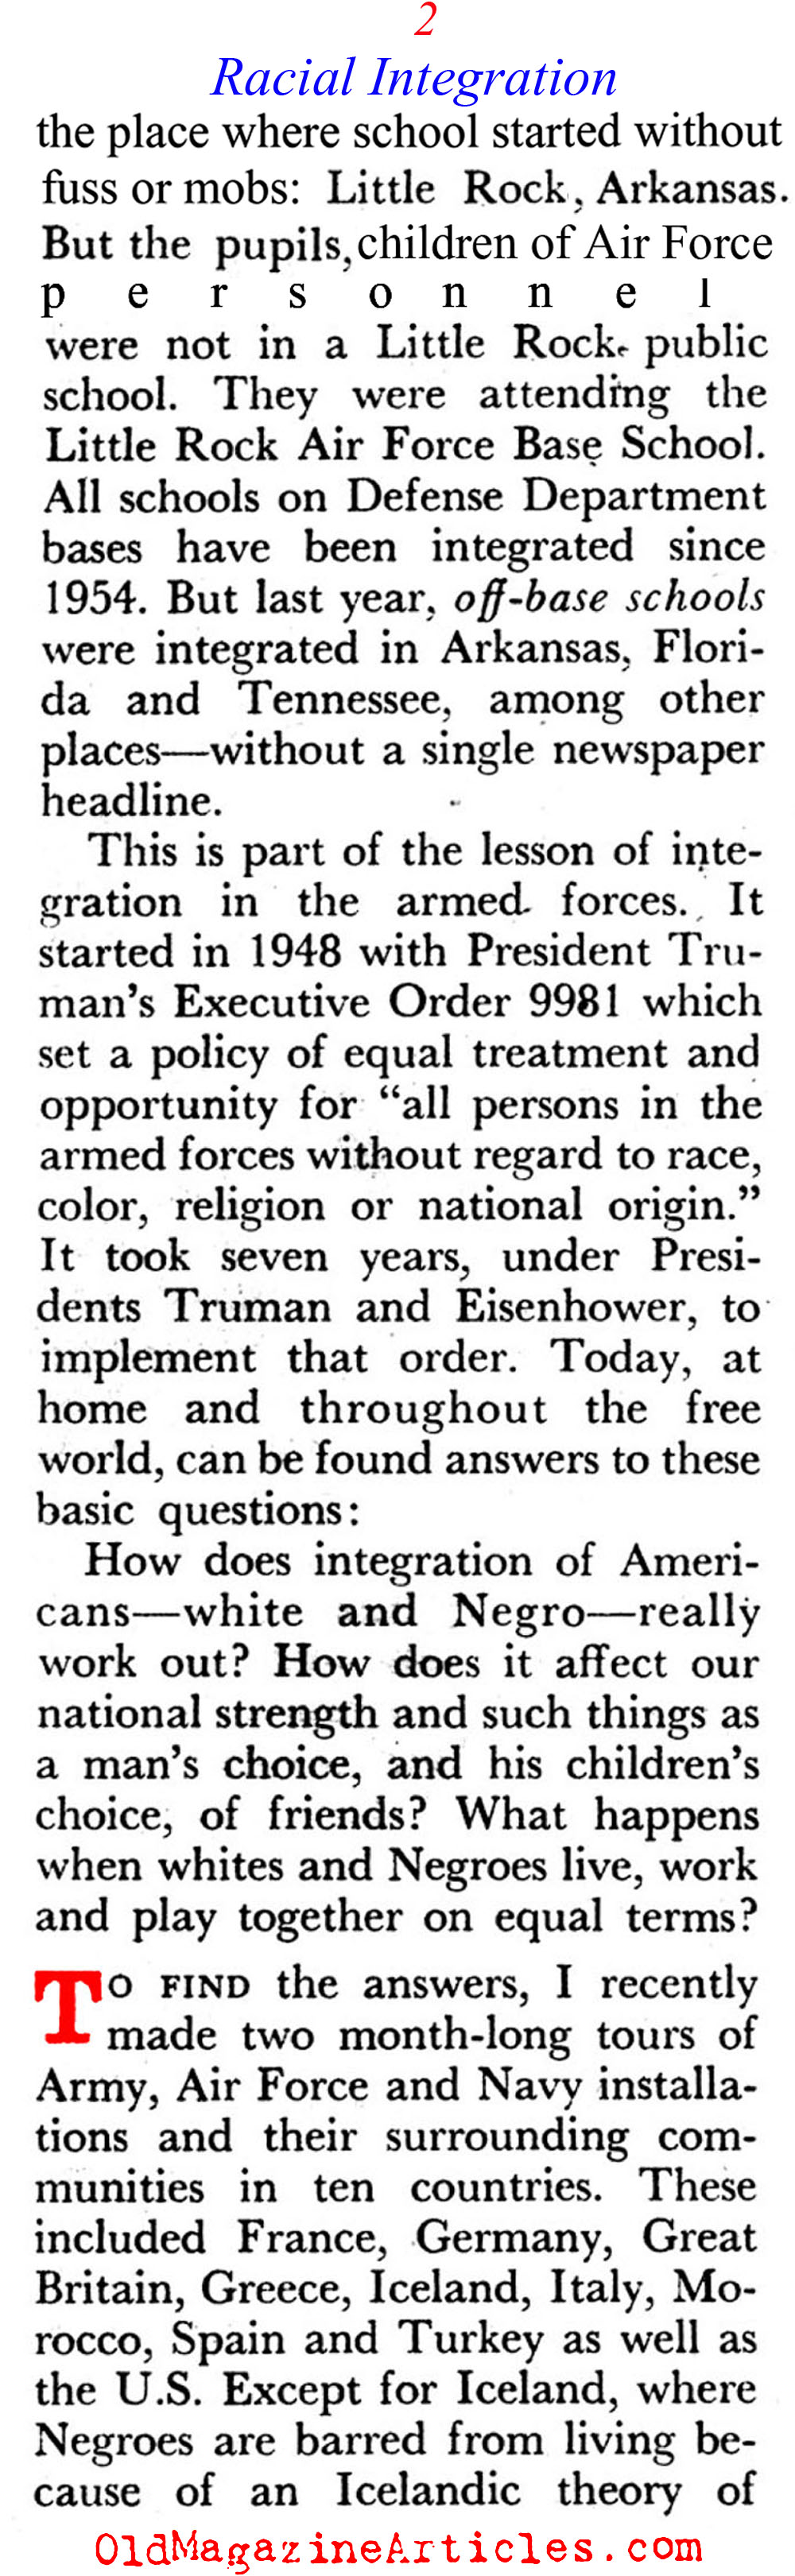 Racial Integration in the U.S. Army   (Coronet Magazine, 1960)